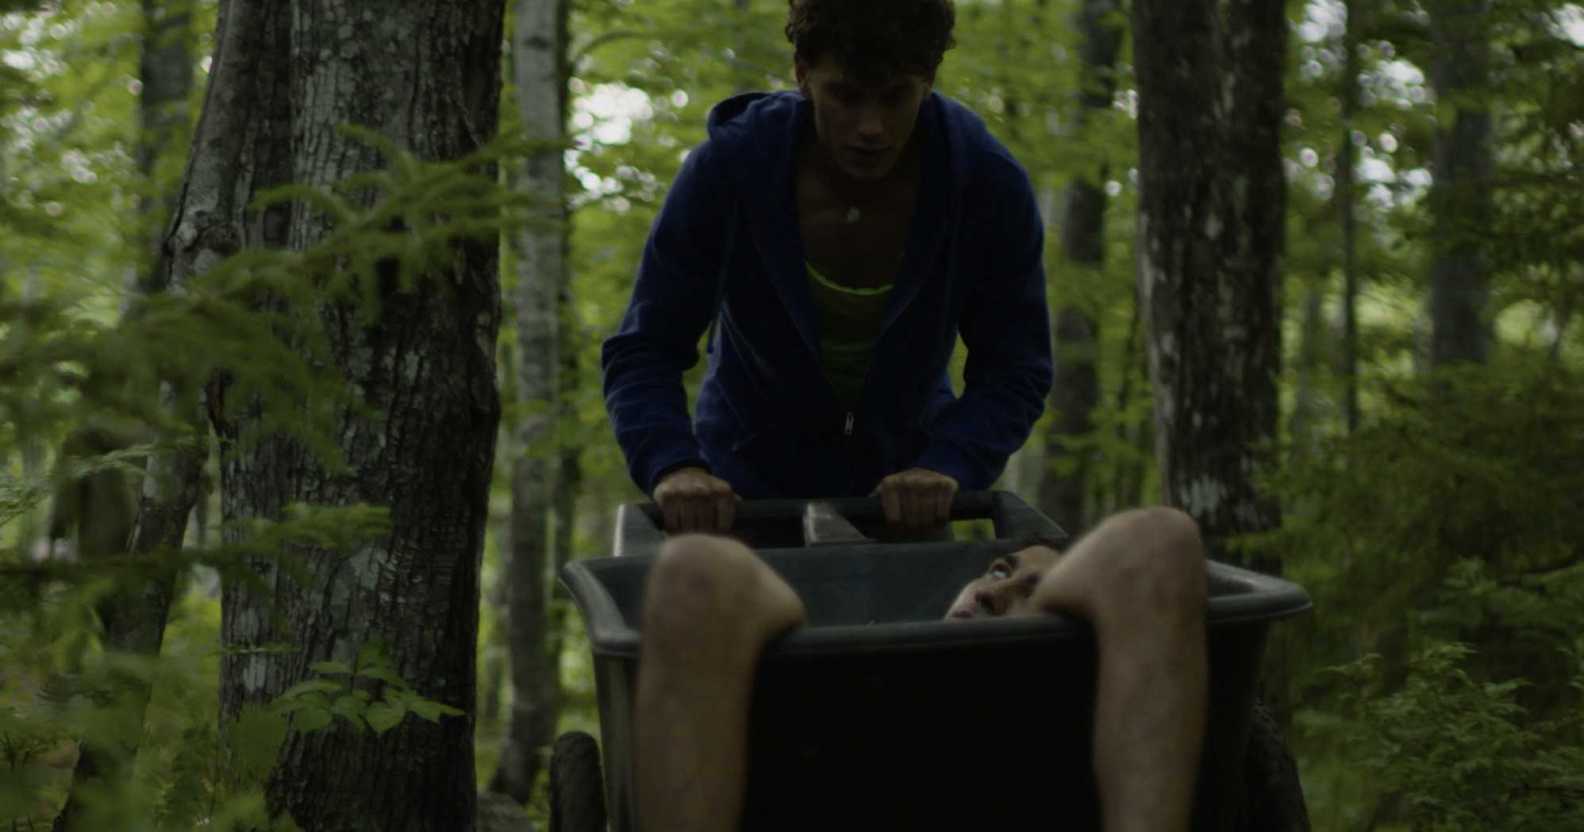 A man pushes a wheelbarrow with a body in.